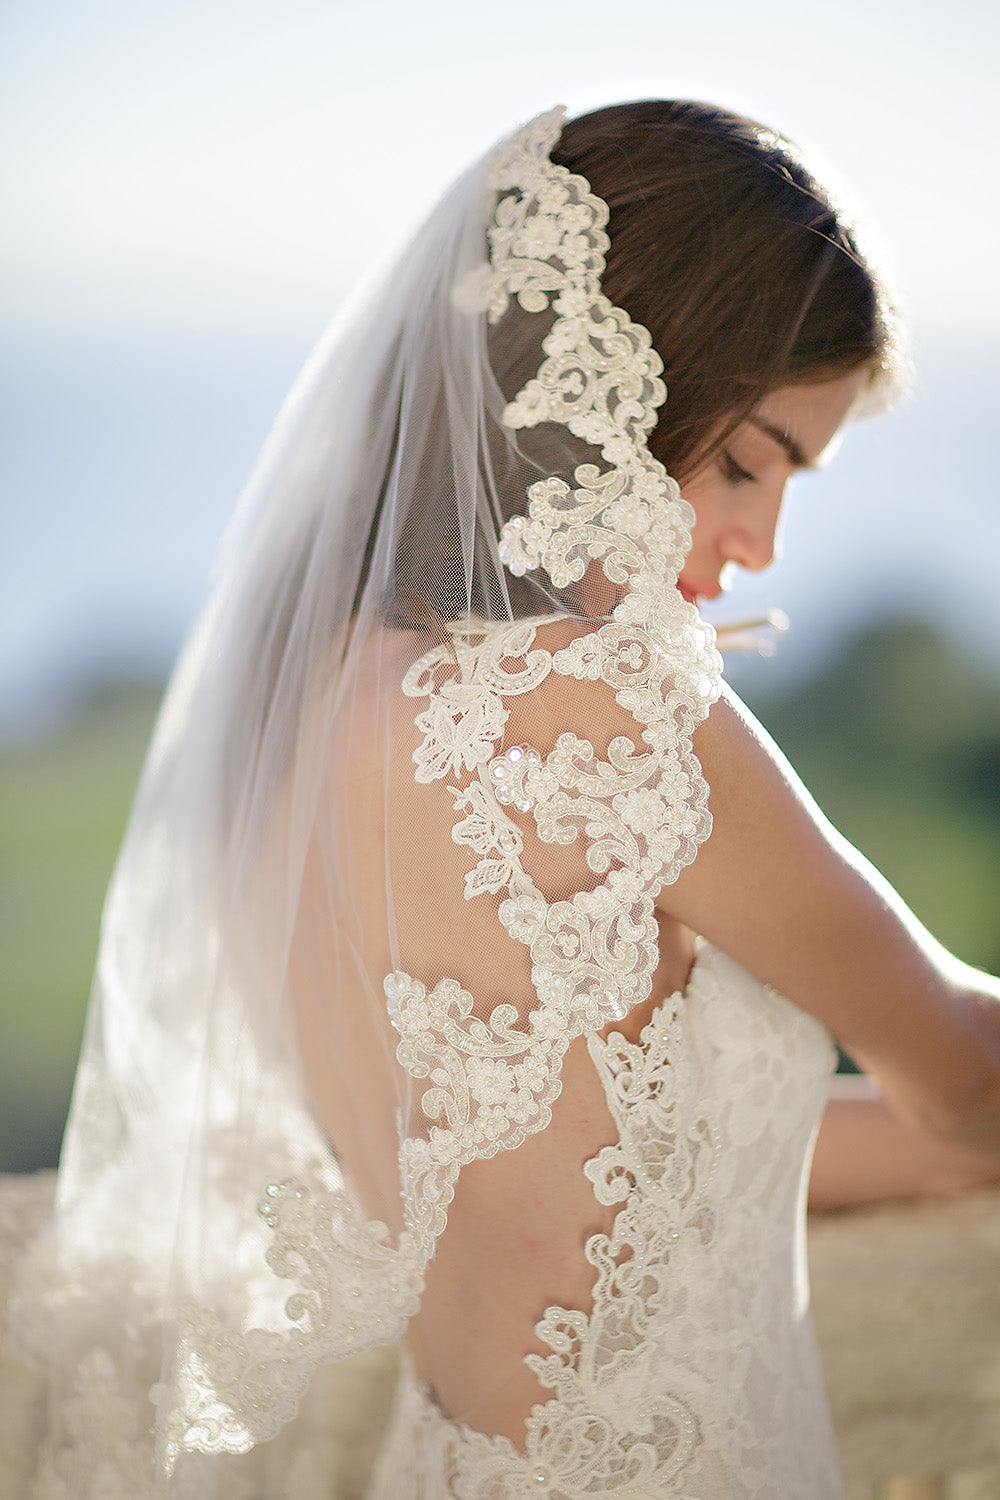 Wedding veil do's and dont's